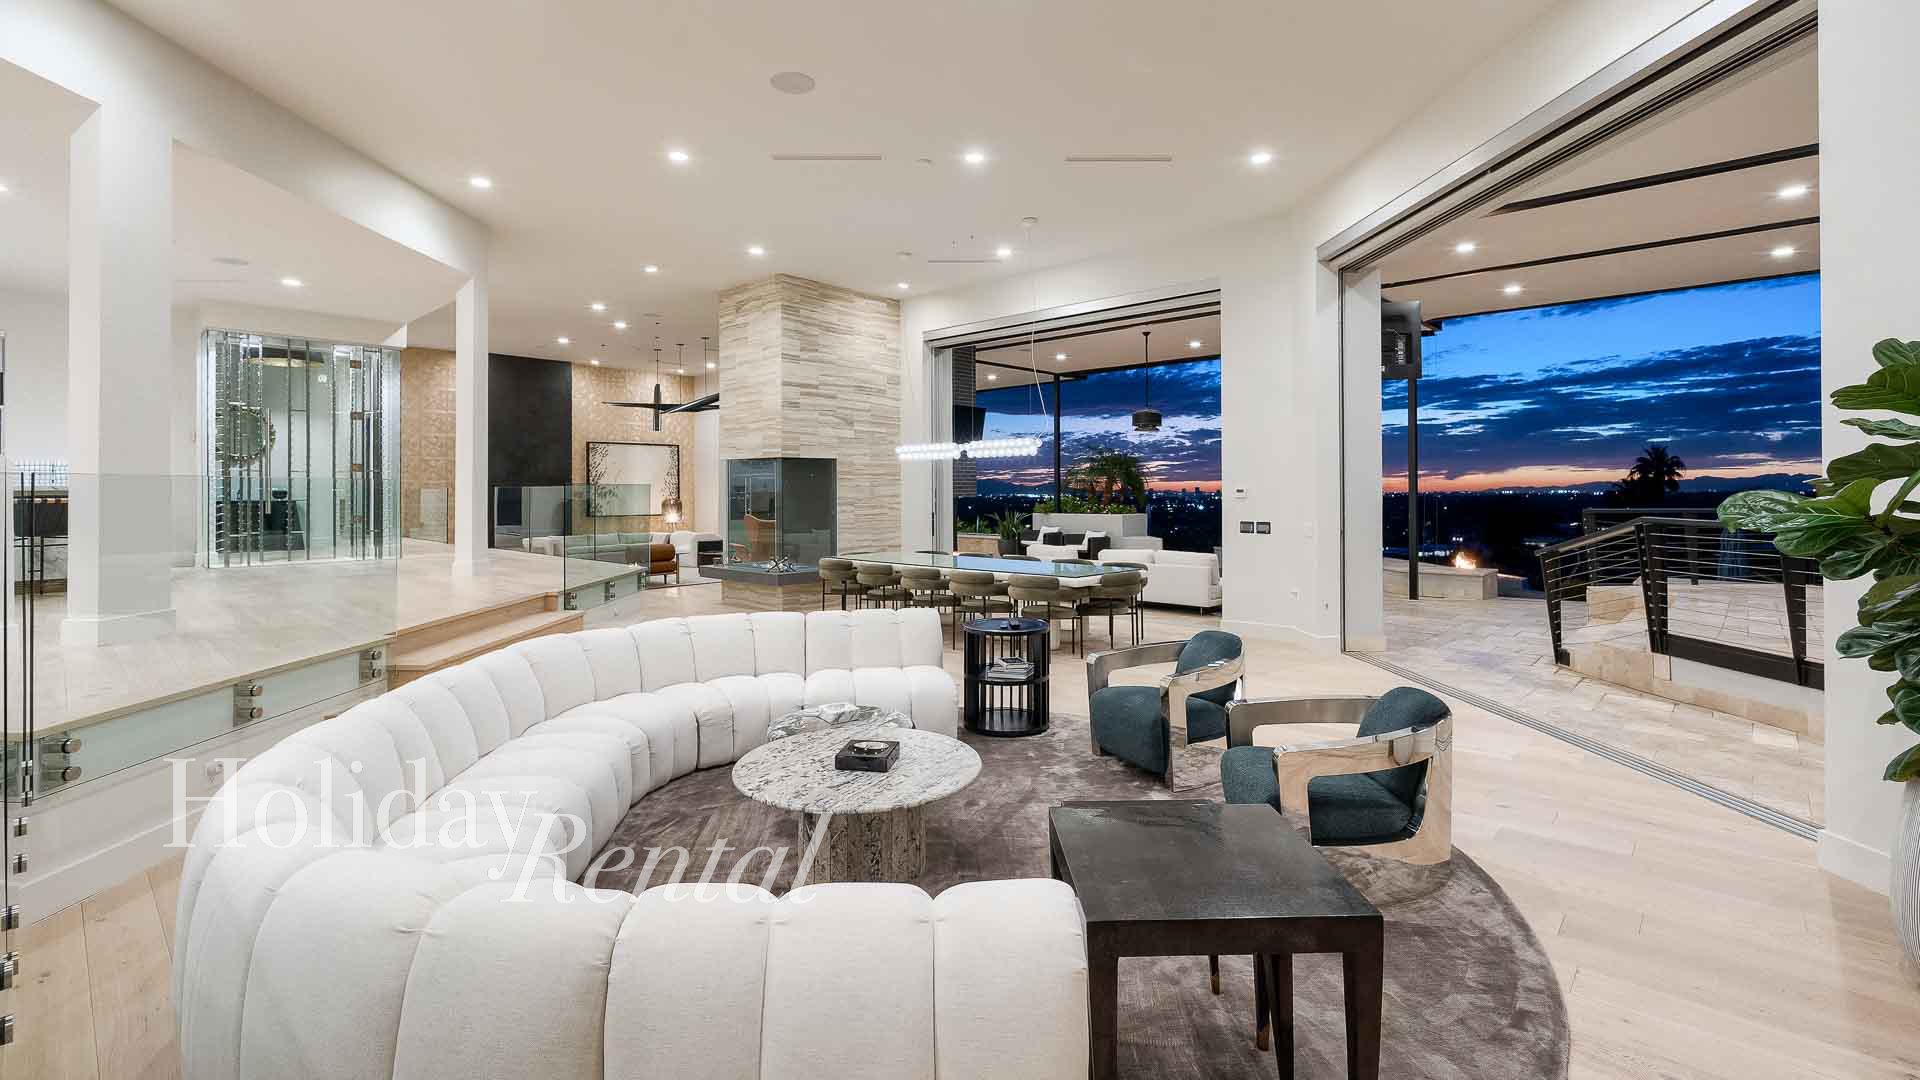 Indoor-outdoor great room opens seamlessly to the spacious patio and displays stunning views of the sunset